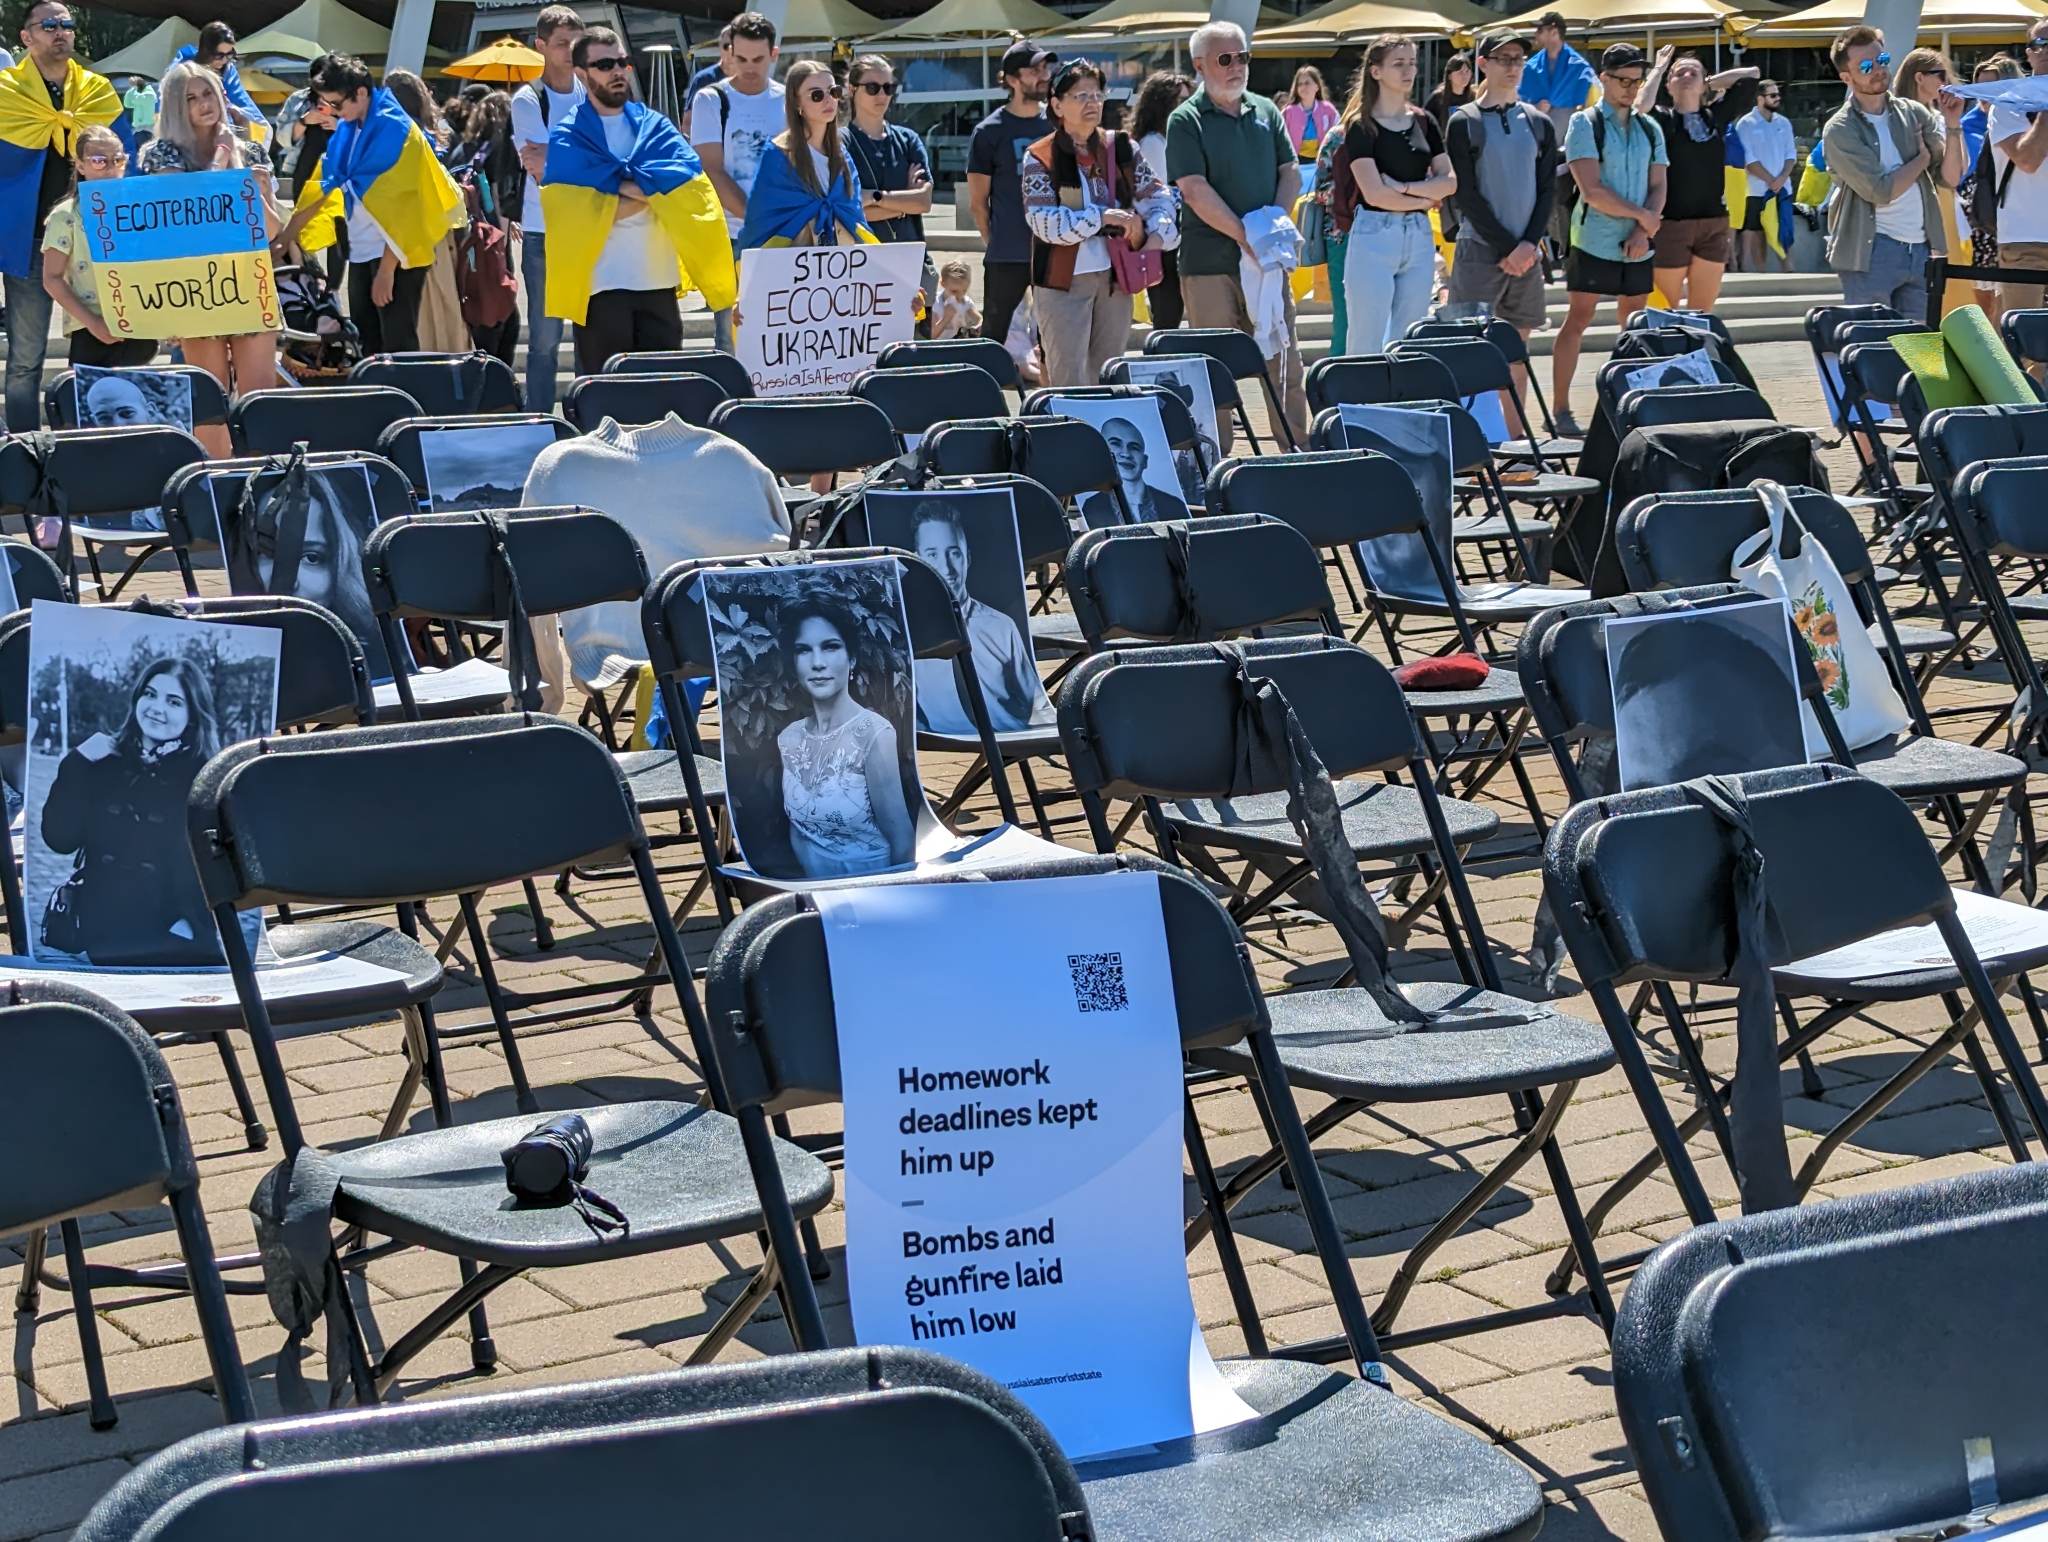 "Unissued Diplomas" event and the rally in support of Kherson flood victims after dam collapse in Ukraine